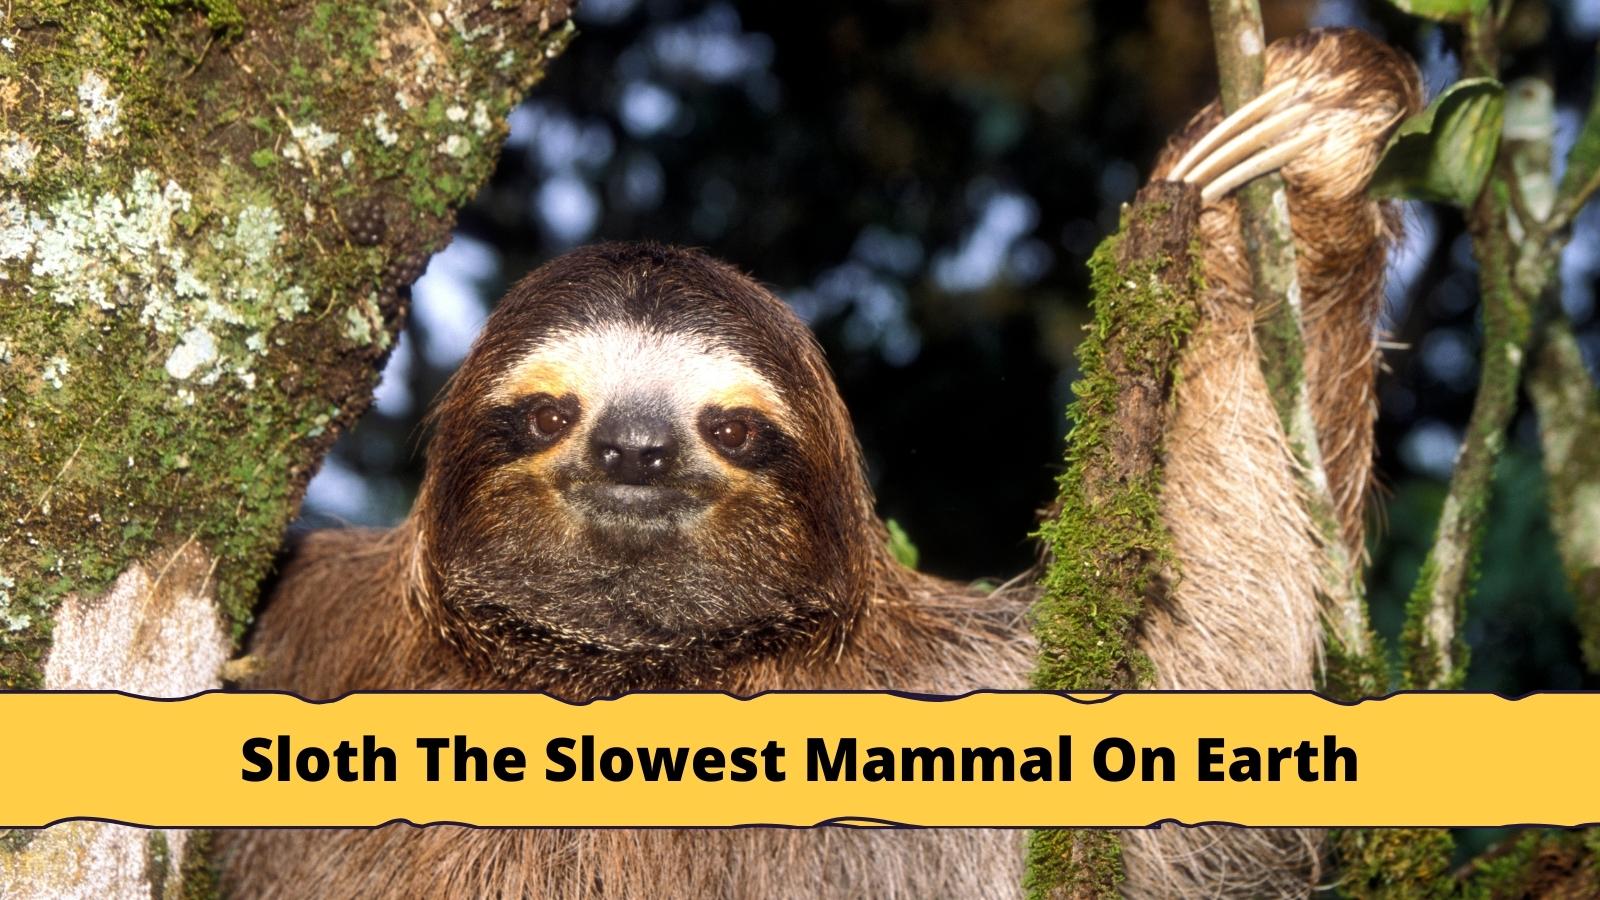 Three-toed Sloth The Slowest Mammal On Earth - Sloth Of The Day